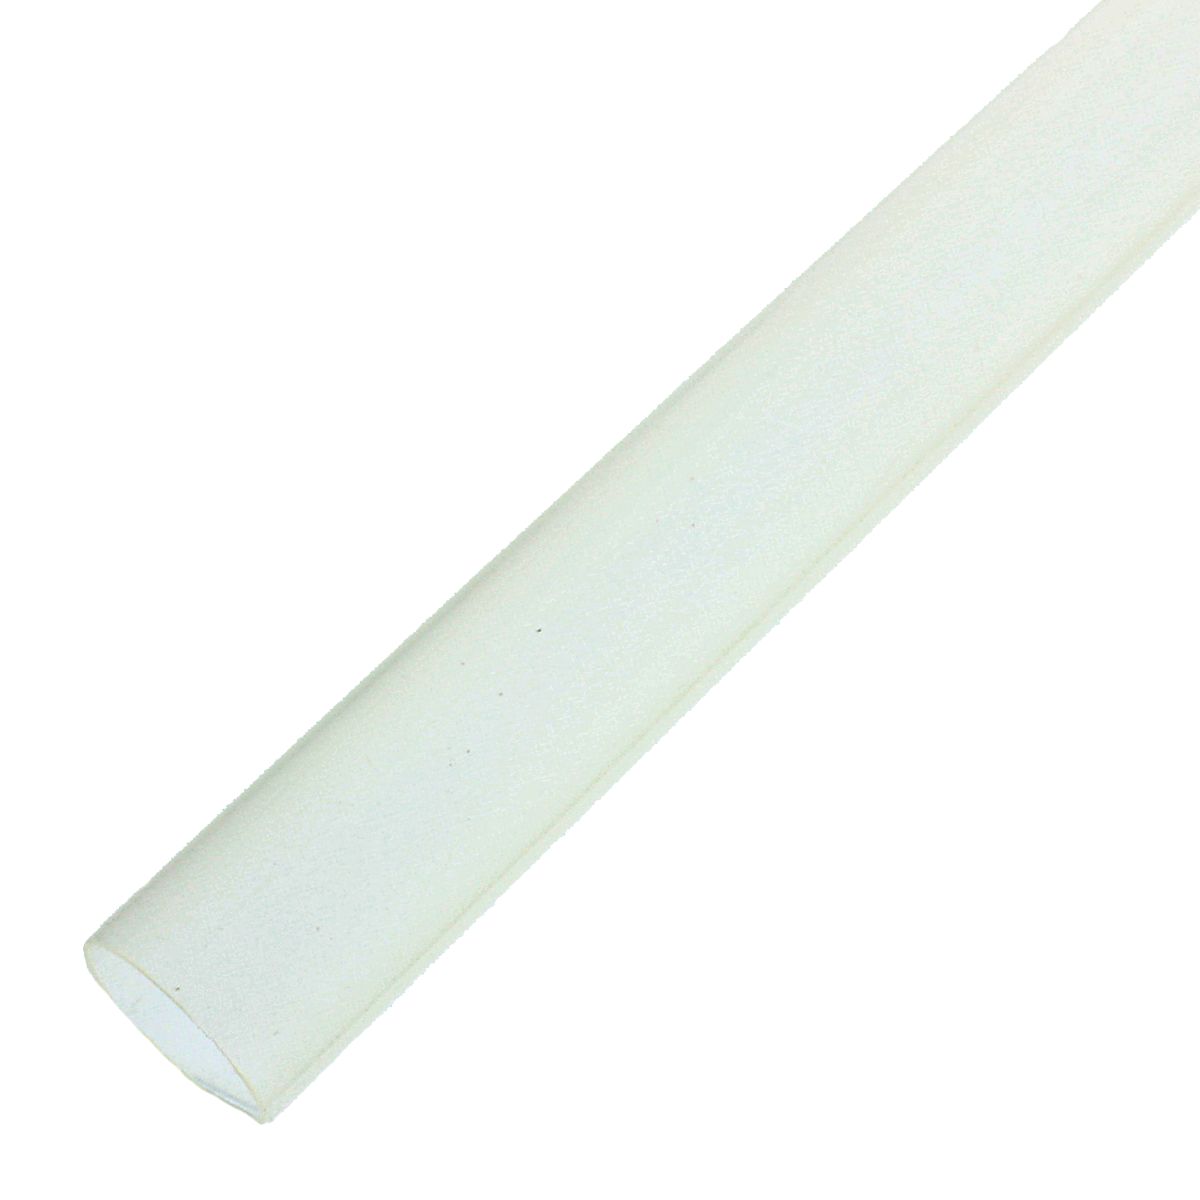 .750"-.250" x 48" 6-2/0 AWG Flexible Adhesive Lined Heat Shrink Tube, Clear